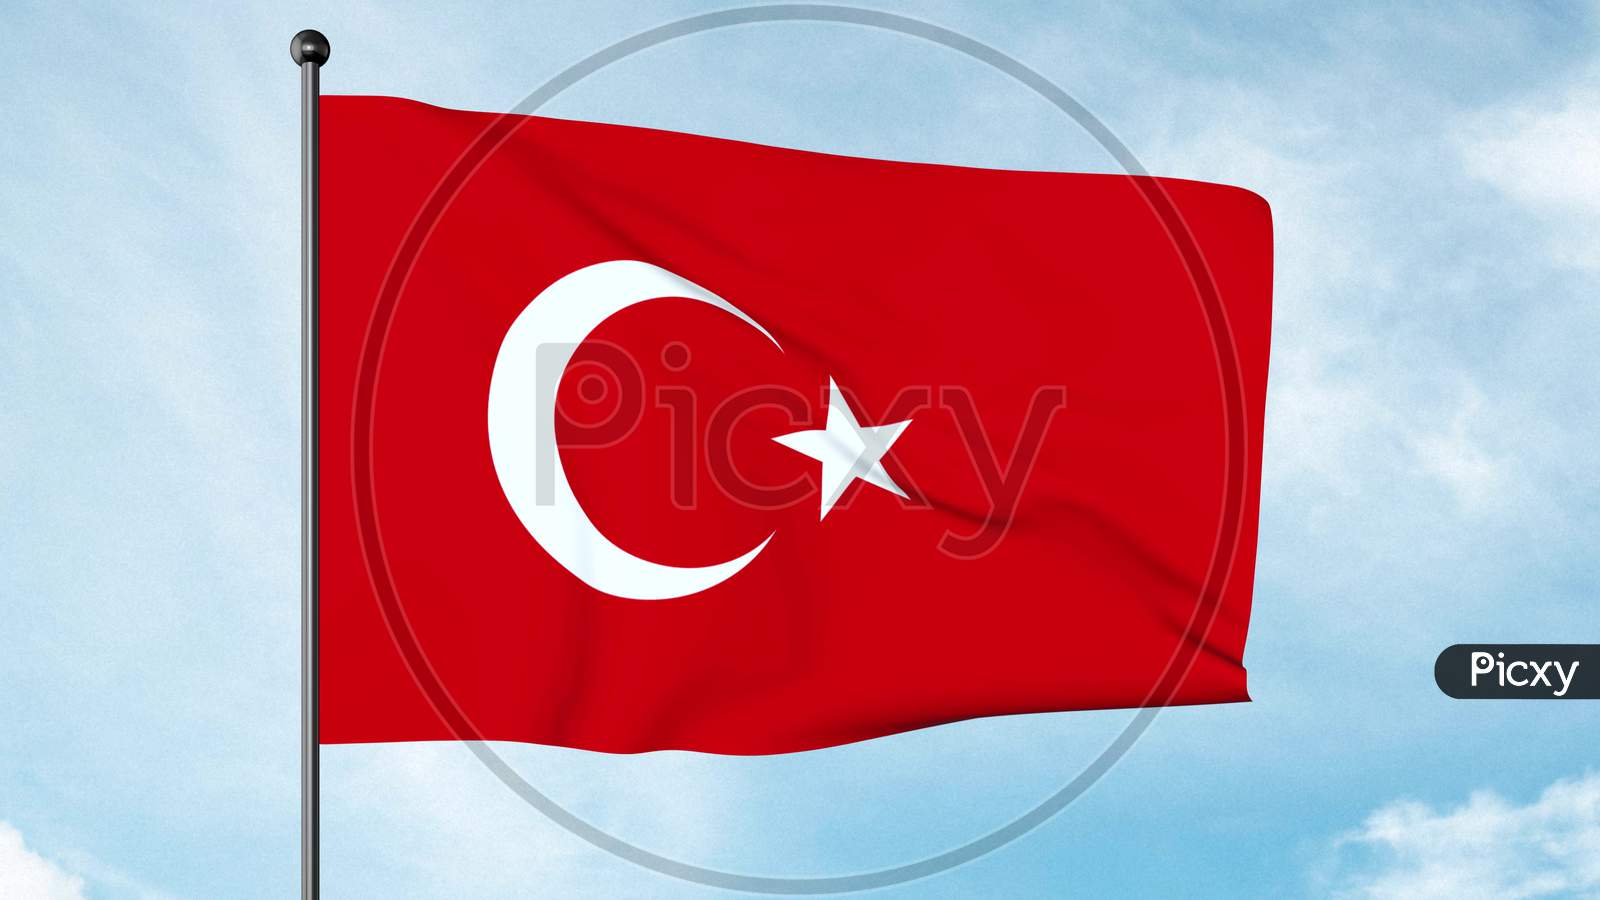 3D Illustration Of The Flag Of Turkey, A Red Flag Featuring A White Star And Crescent. The Flag Is Often Called Al Bayrak, And Is Referred To As Al Sancak In The Turkish National Anthem.